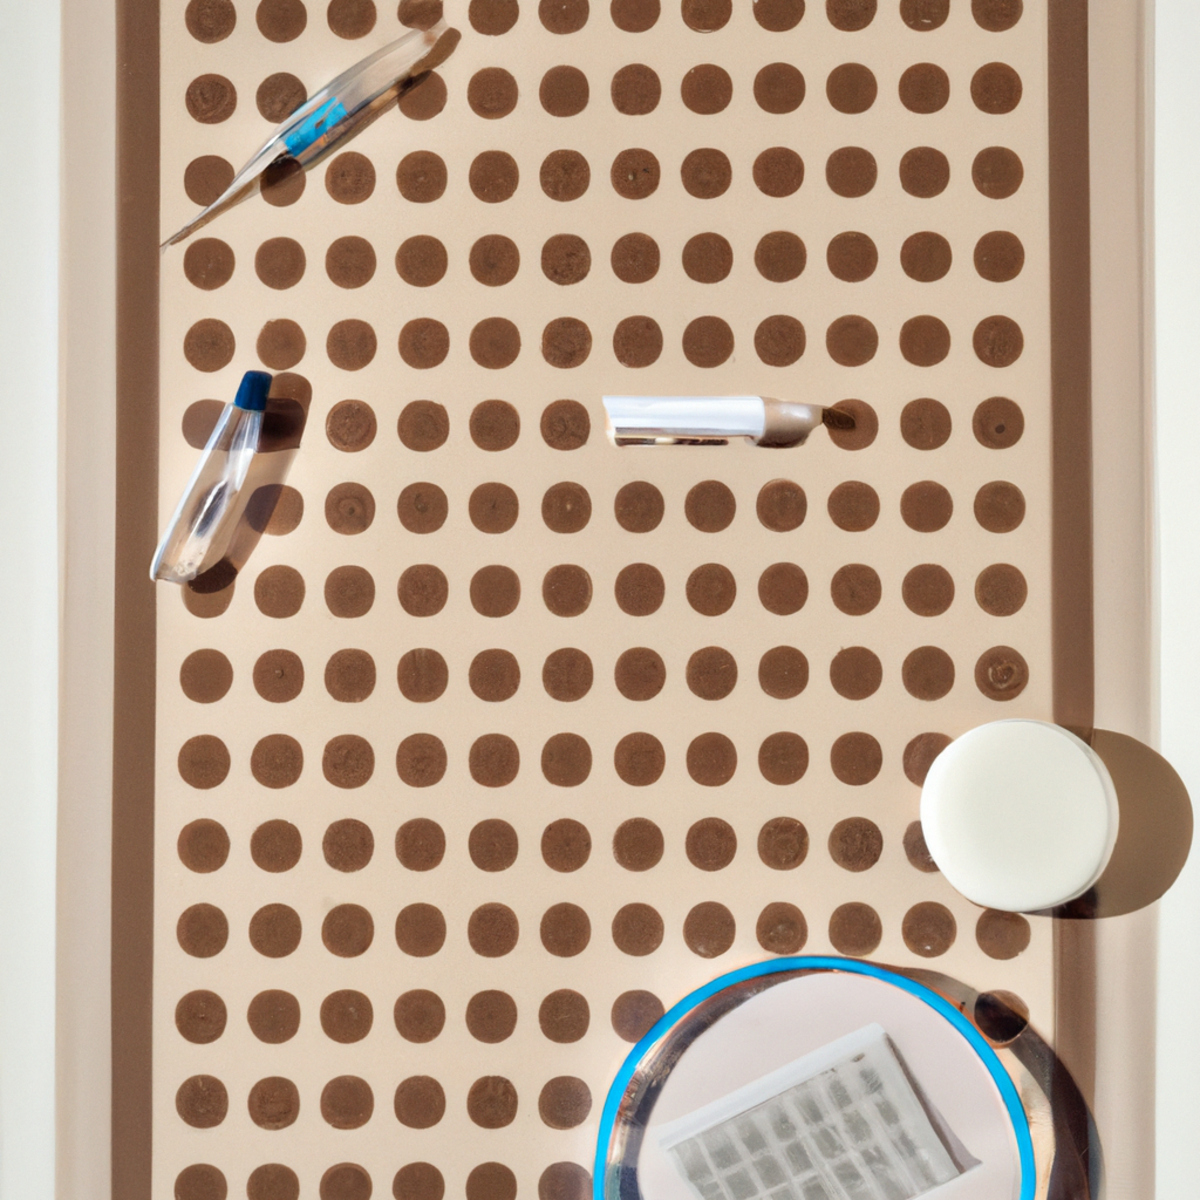 Close-up of table with allergy testing tools: allergen vial, syringes, forms, magnifying glass, microscope. Meticulous process of skin allergy testing.